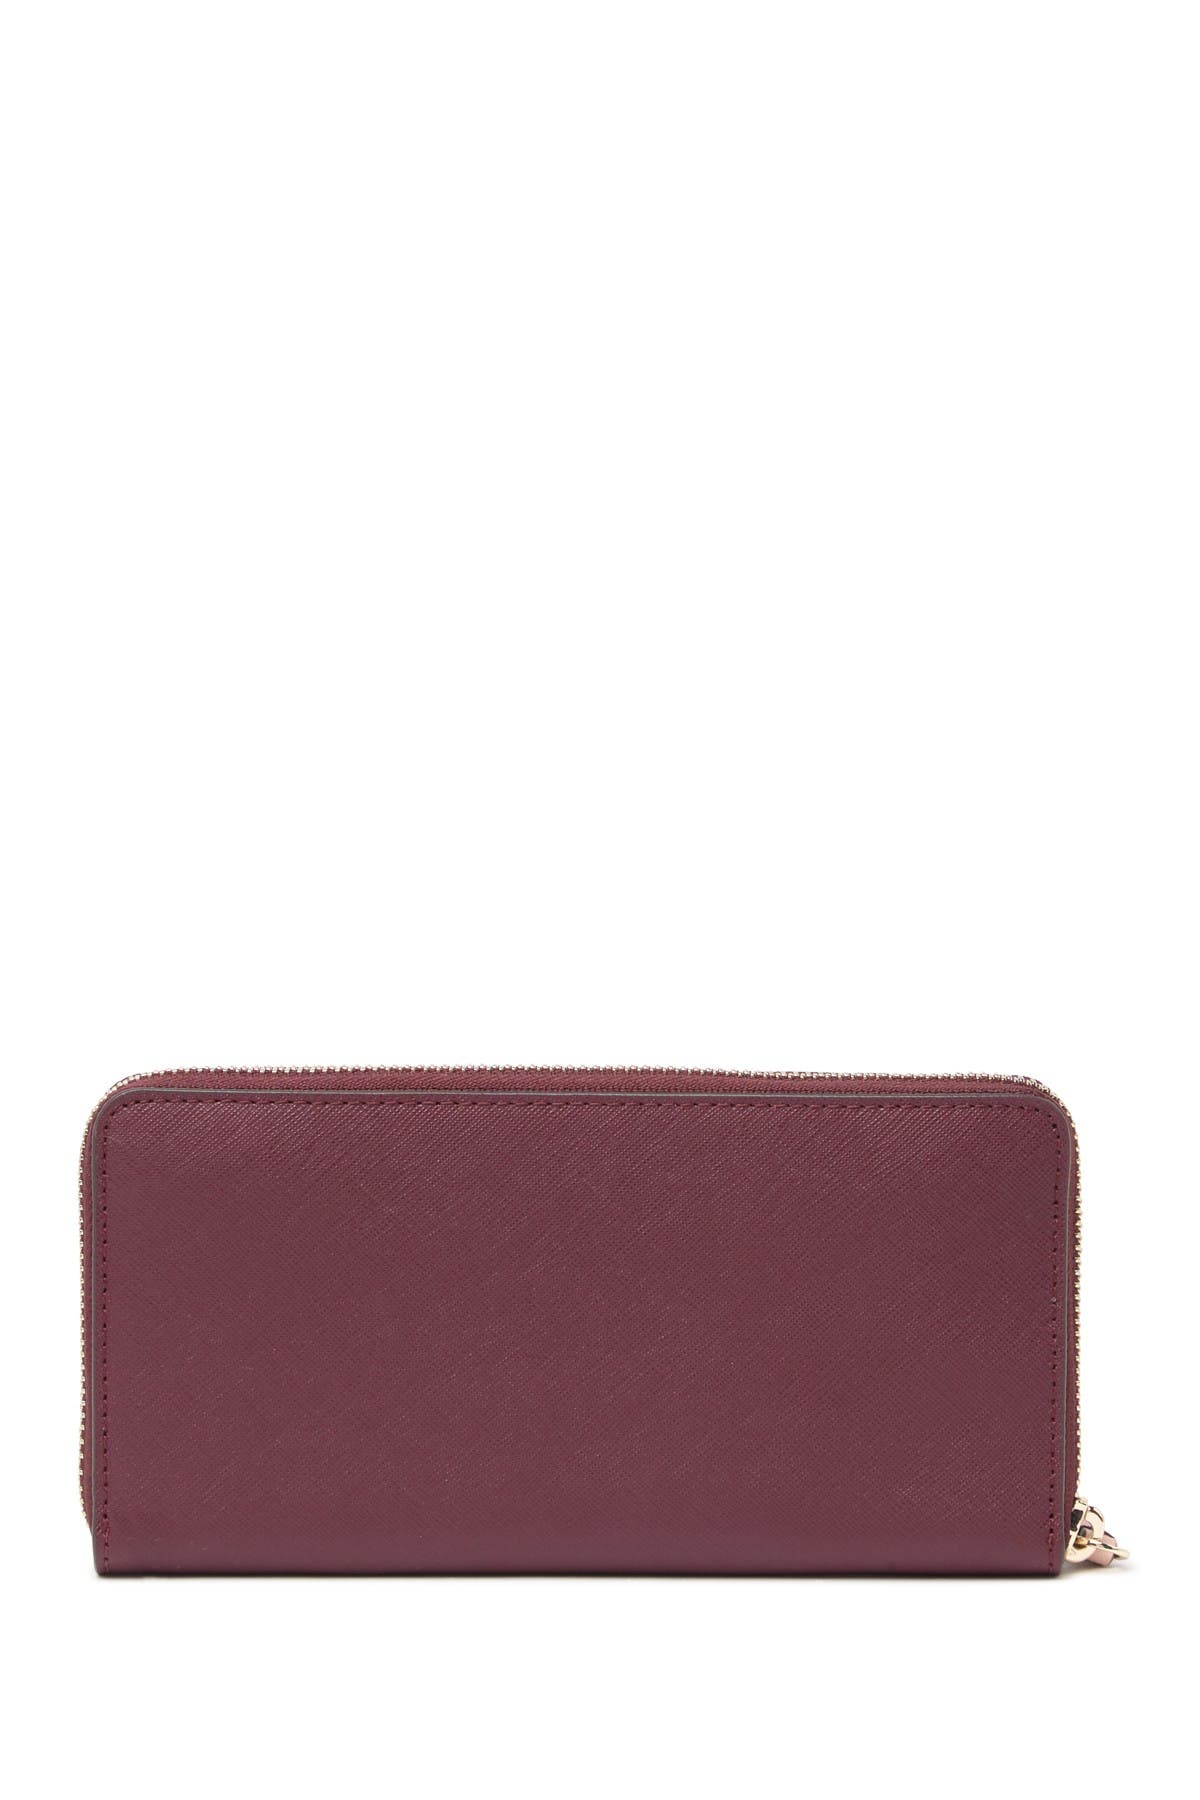 kate spade new york | leather cameron large continental wallet ...